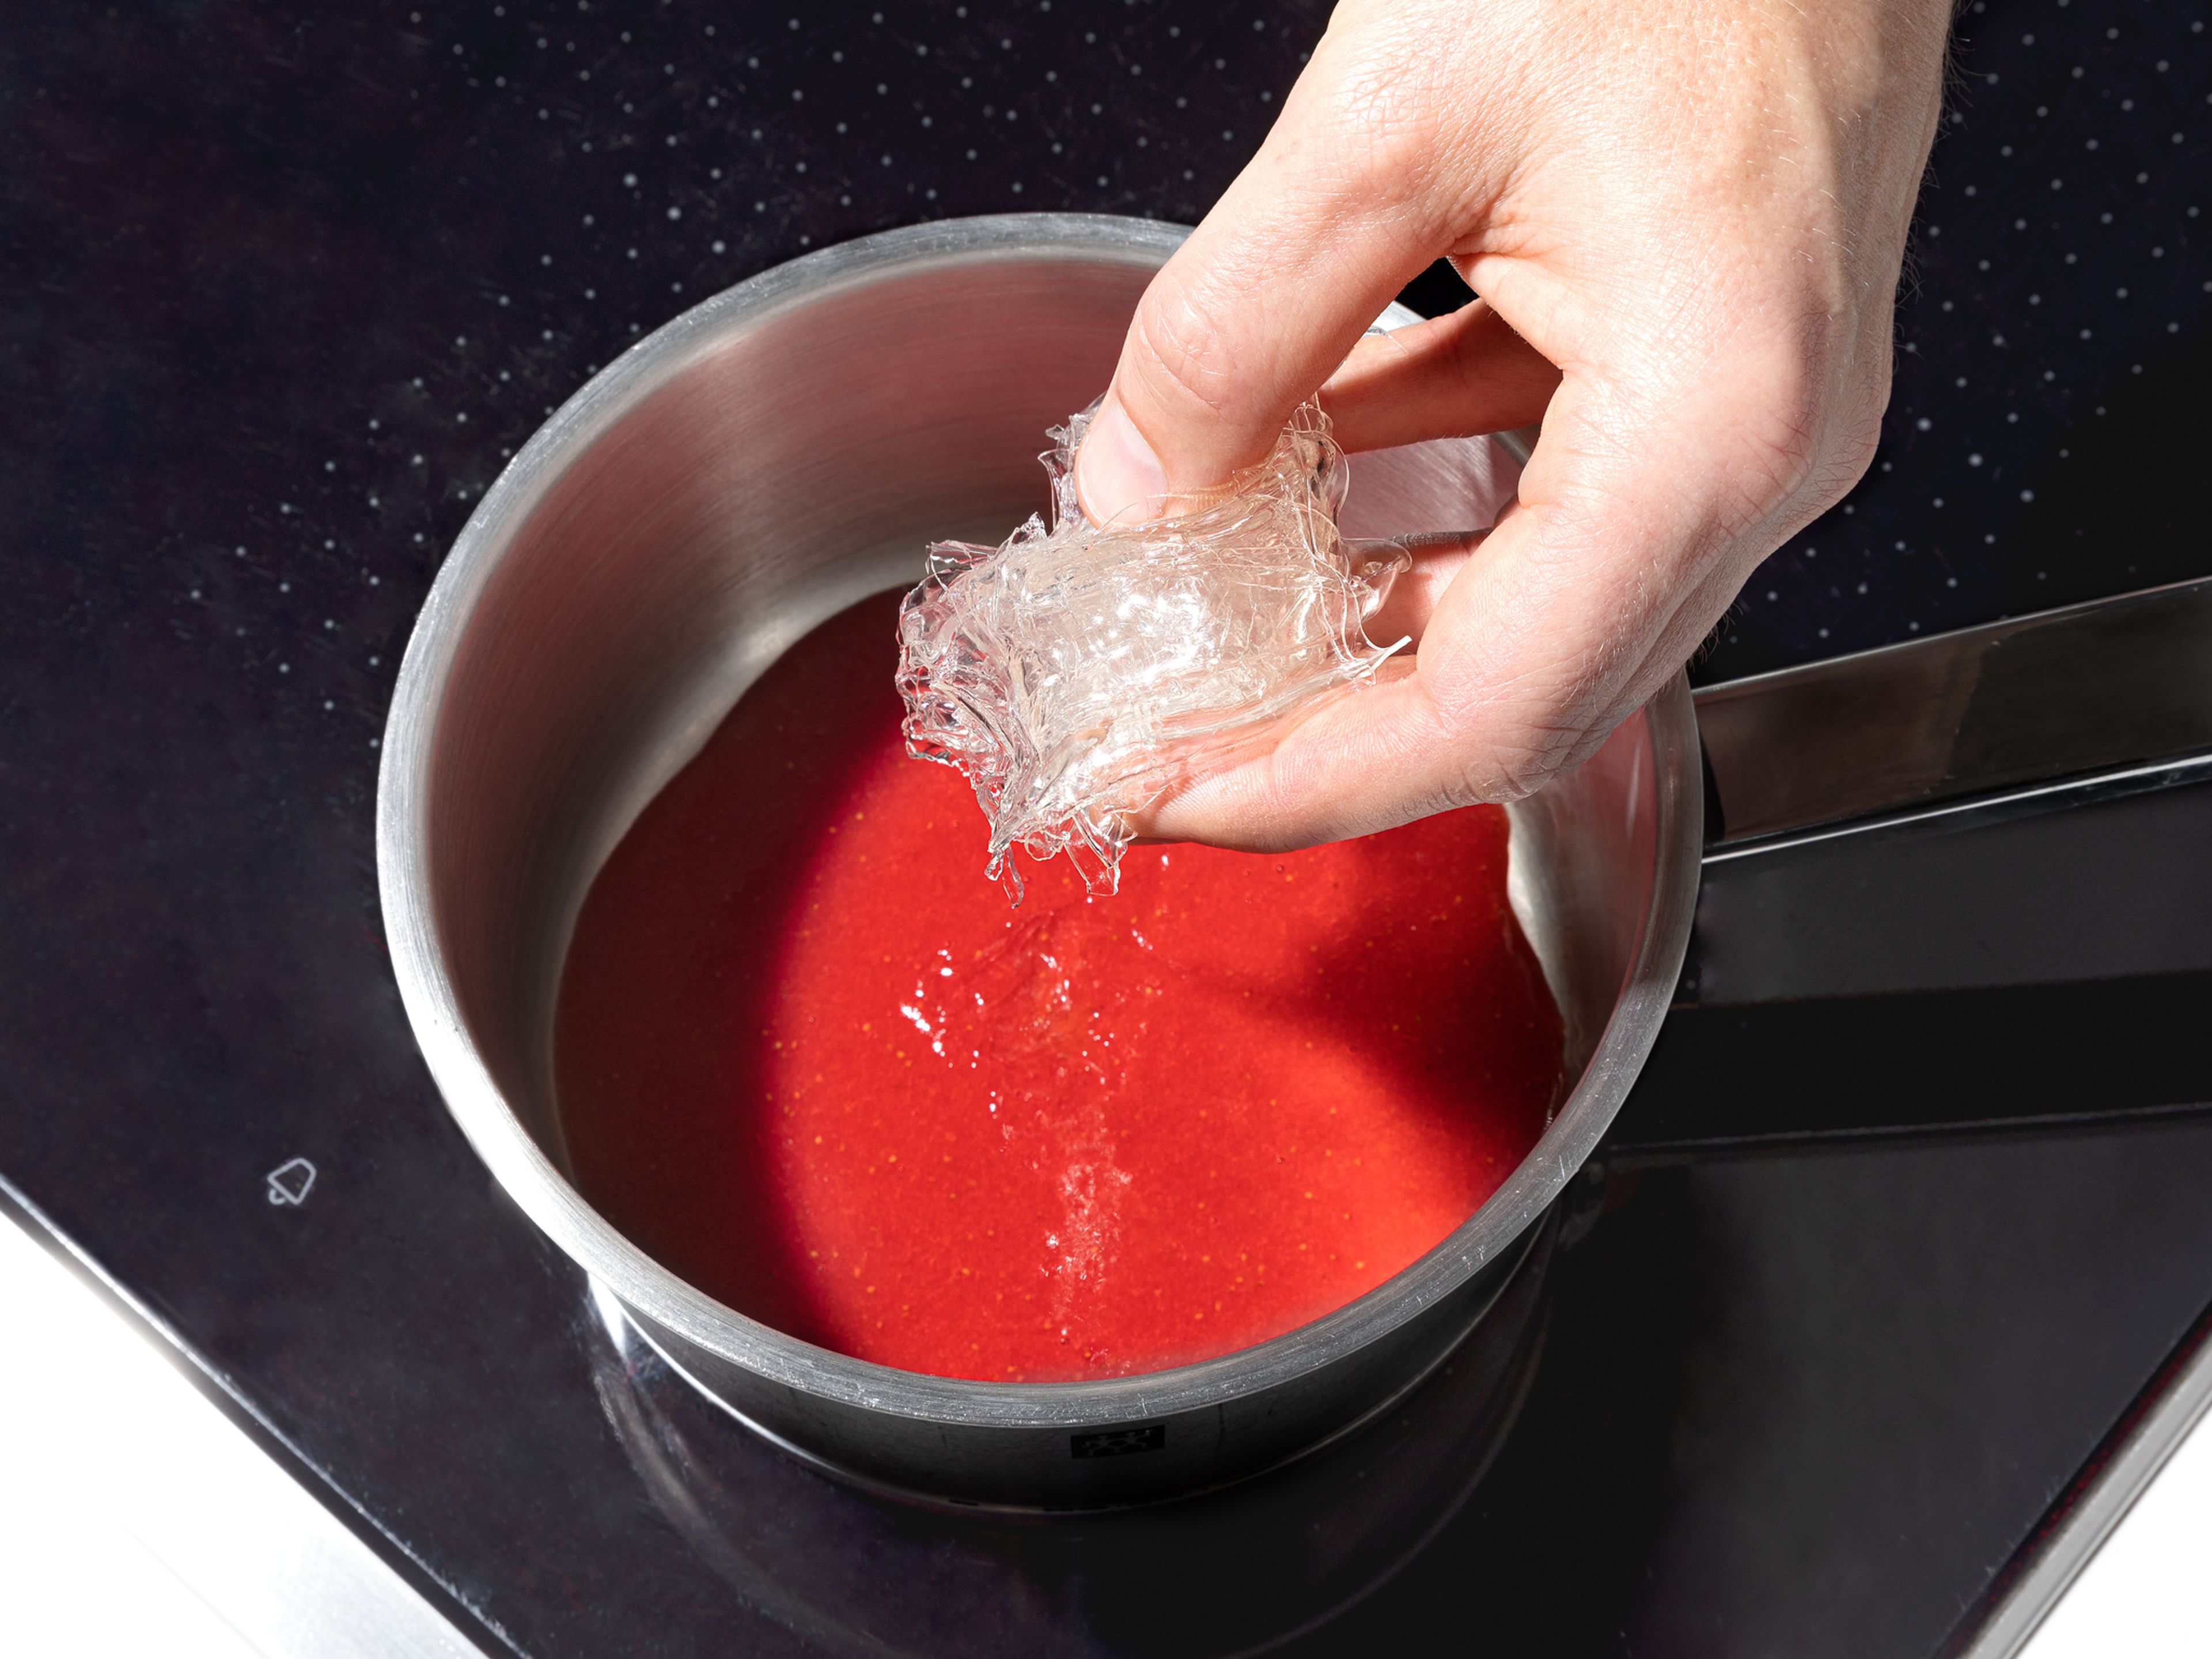 To make the strawberry puree, soak the remaining gelatine sheets in cold water for approximately 5 minutes. Wash the strawberries and purée some of them with a little lemon zest and strain them through a fine sieve. Squeeze out the gelatine, place into a small pot with a few tablespoons of the strawberry puree and carefully dissolve over a low heat. Stir in the remaining strawberry puree and pour the mixture onto the tart, then refrigerate again for approximately 1 hour.